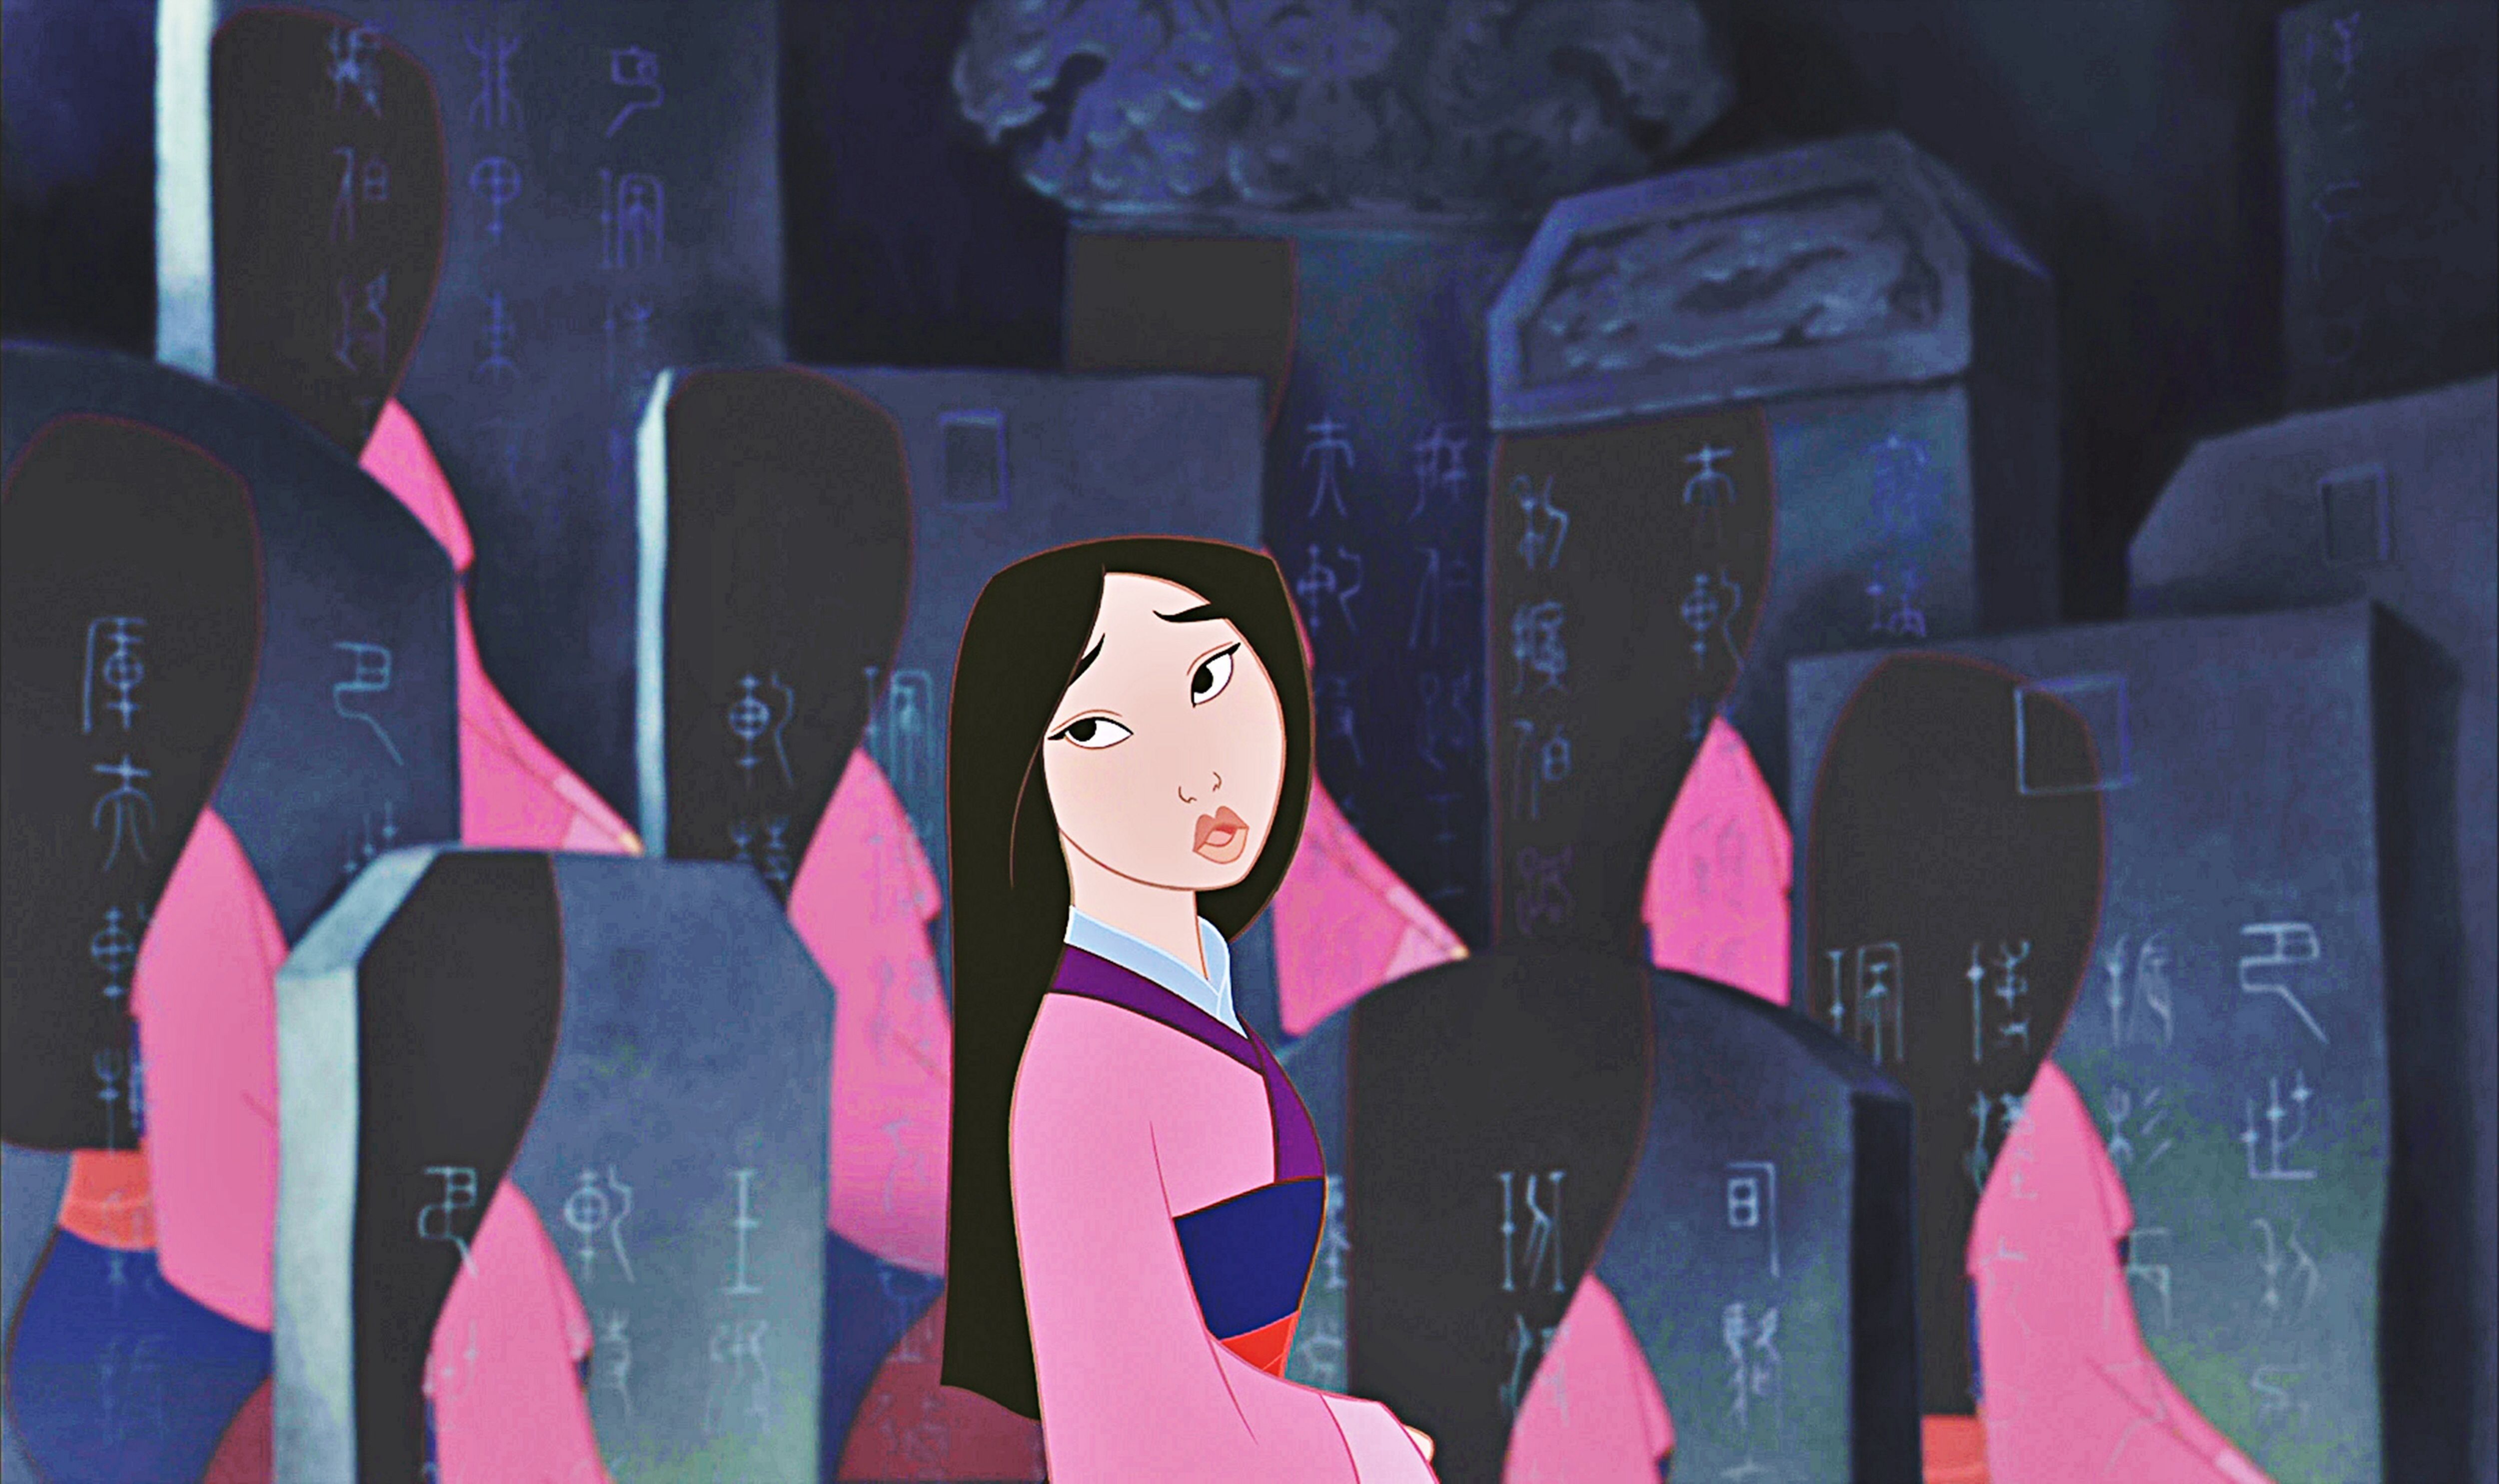 A scene from the animated movie Mulan. - Mulan